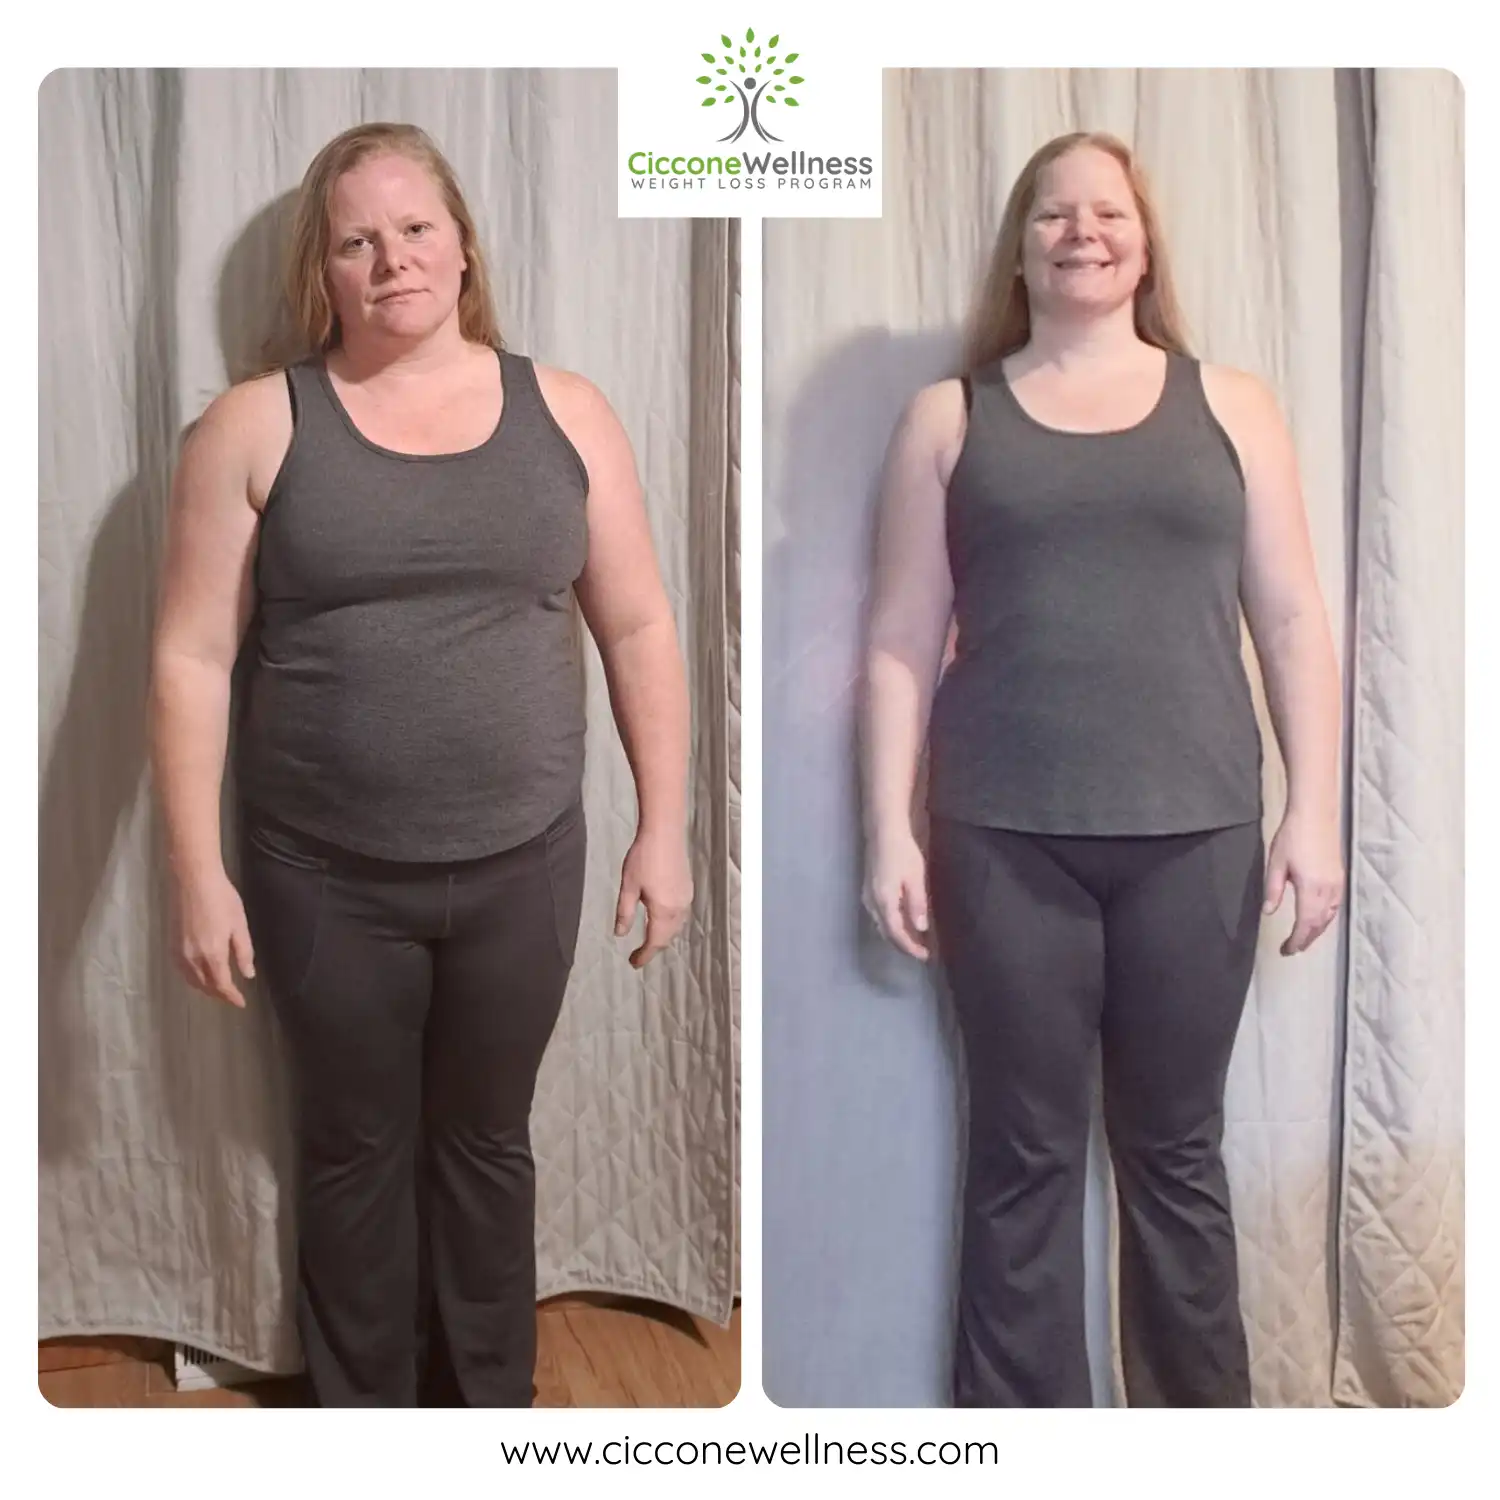 Amanda before and after weight loss front view